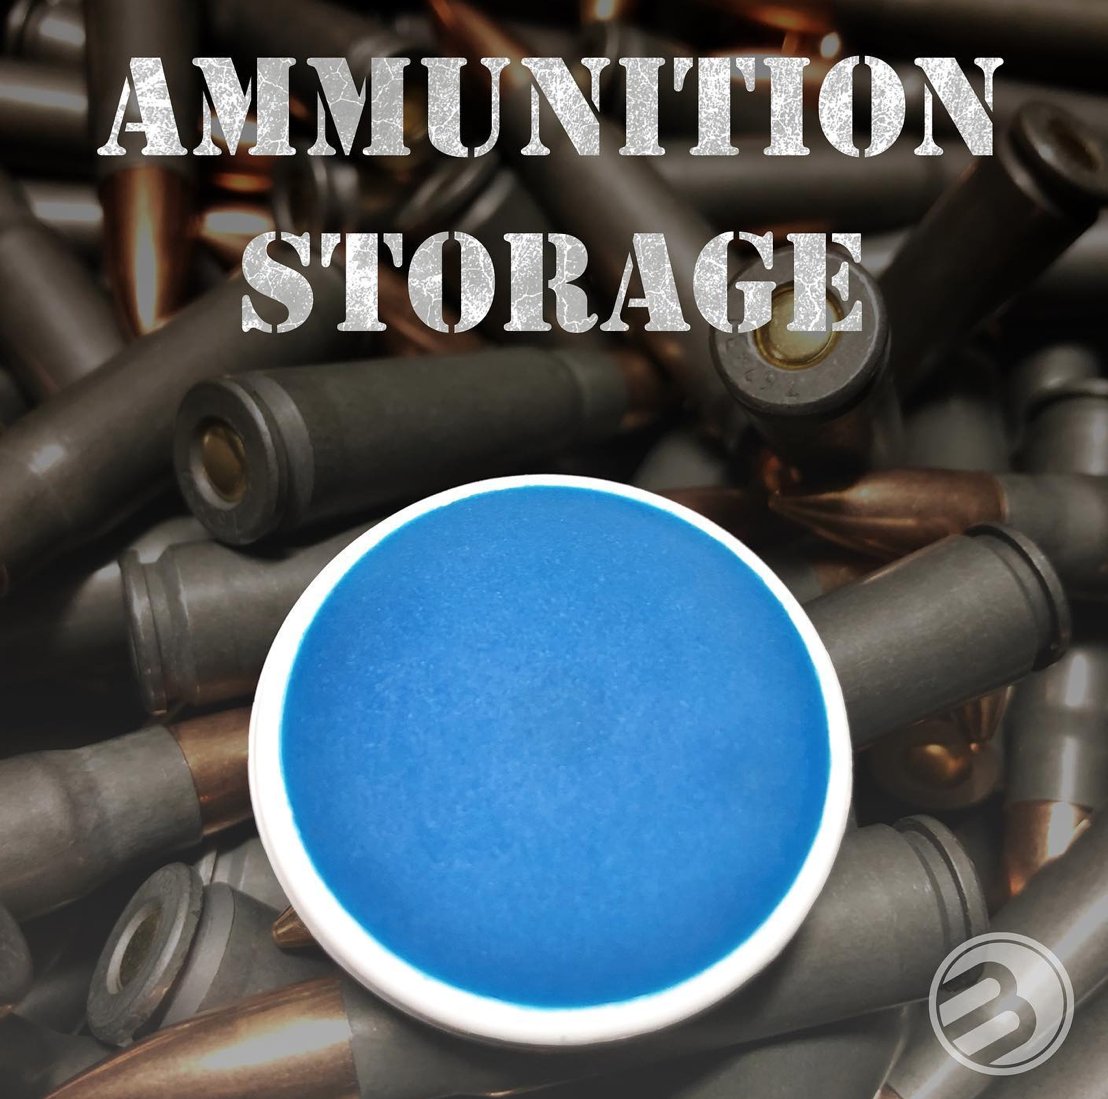 🔵 Monitoring conditions for ammunition storage is very important. Un-coated steel cased rounds are especially susceptible to rust Using a tempo disc in your ammo cans or storing environment can help ensure that your rounds are dry & ready when you need them #ammostorage #gunsafe